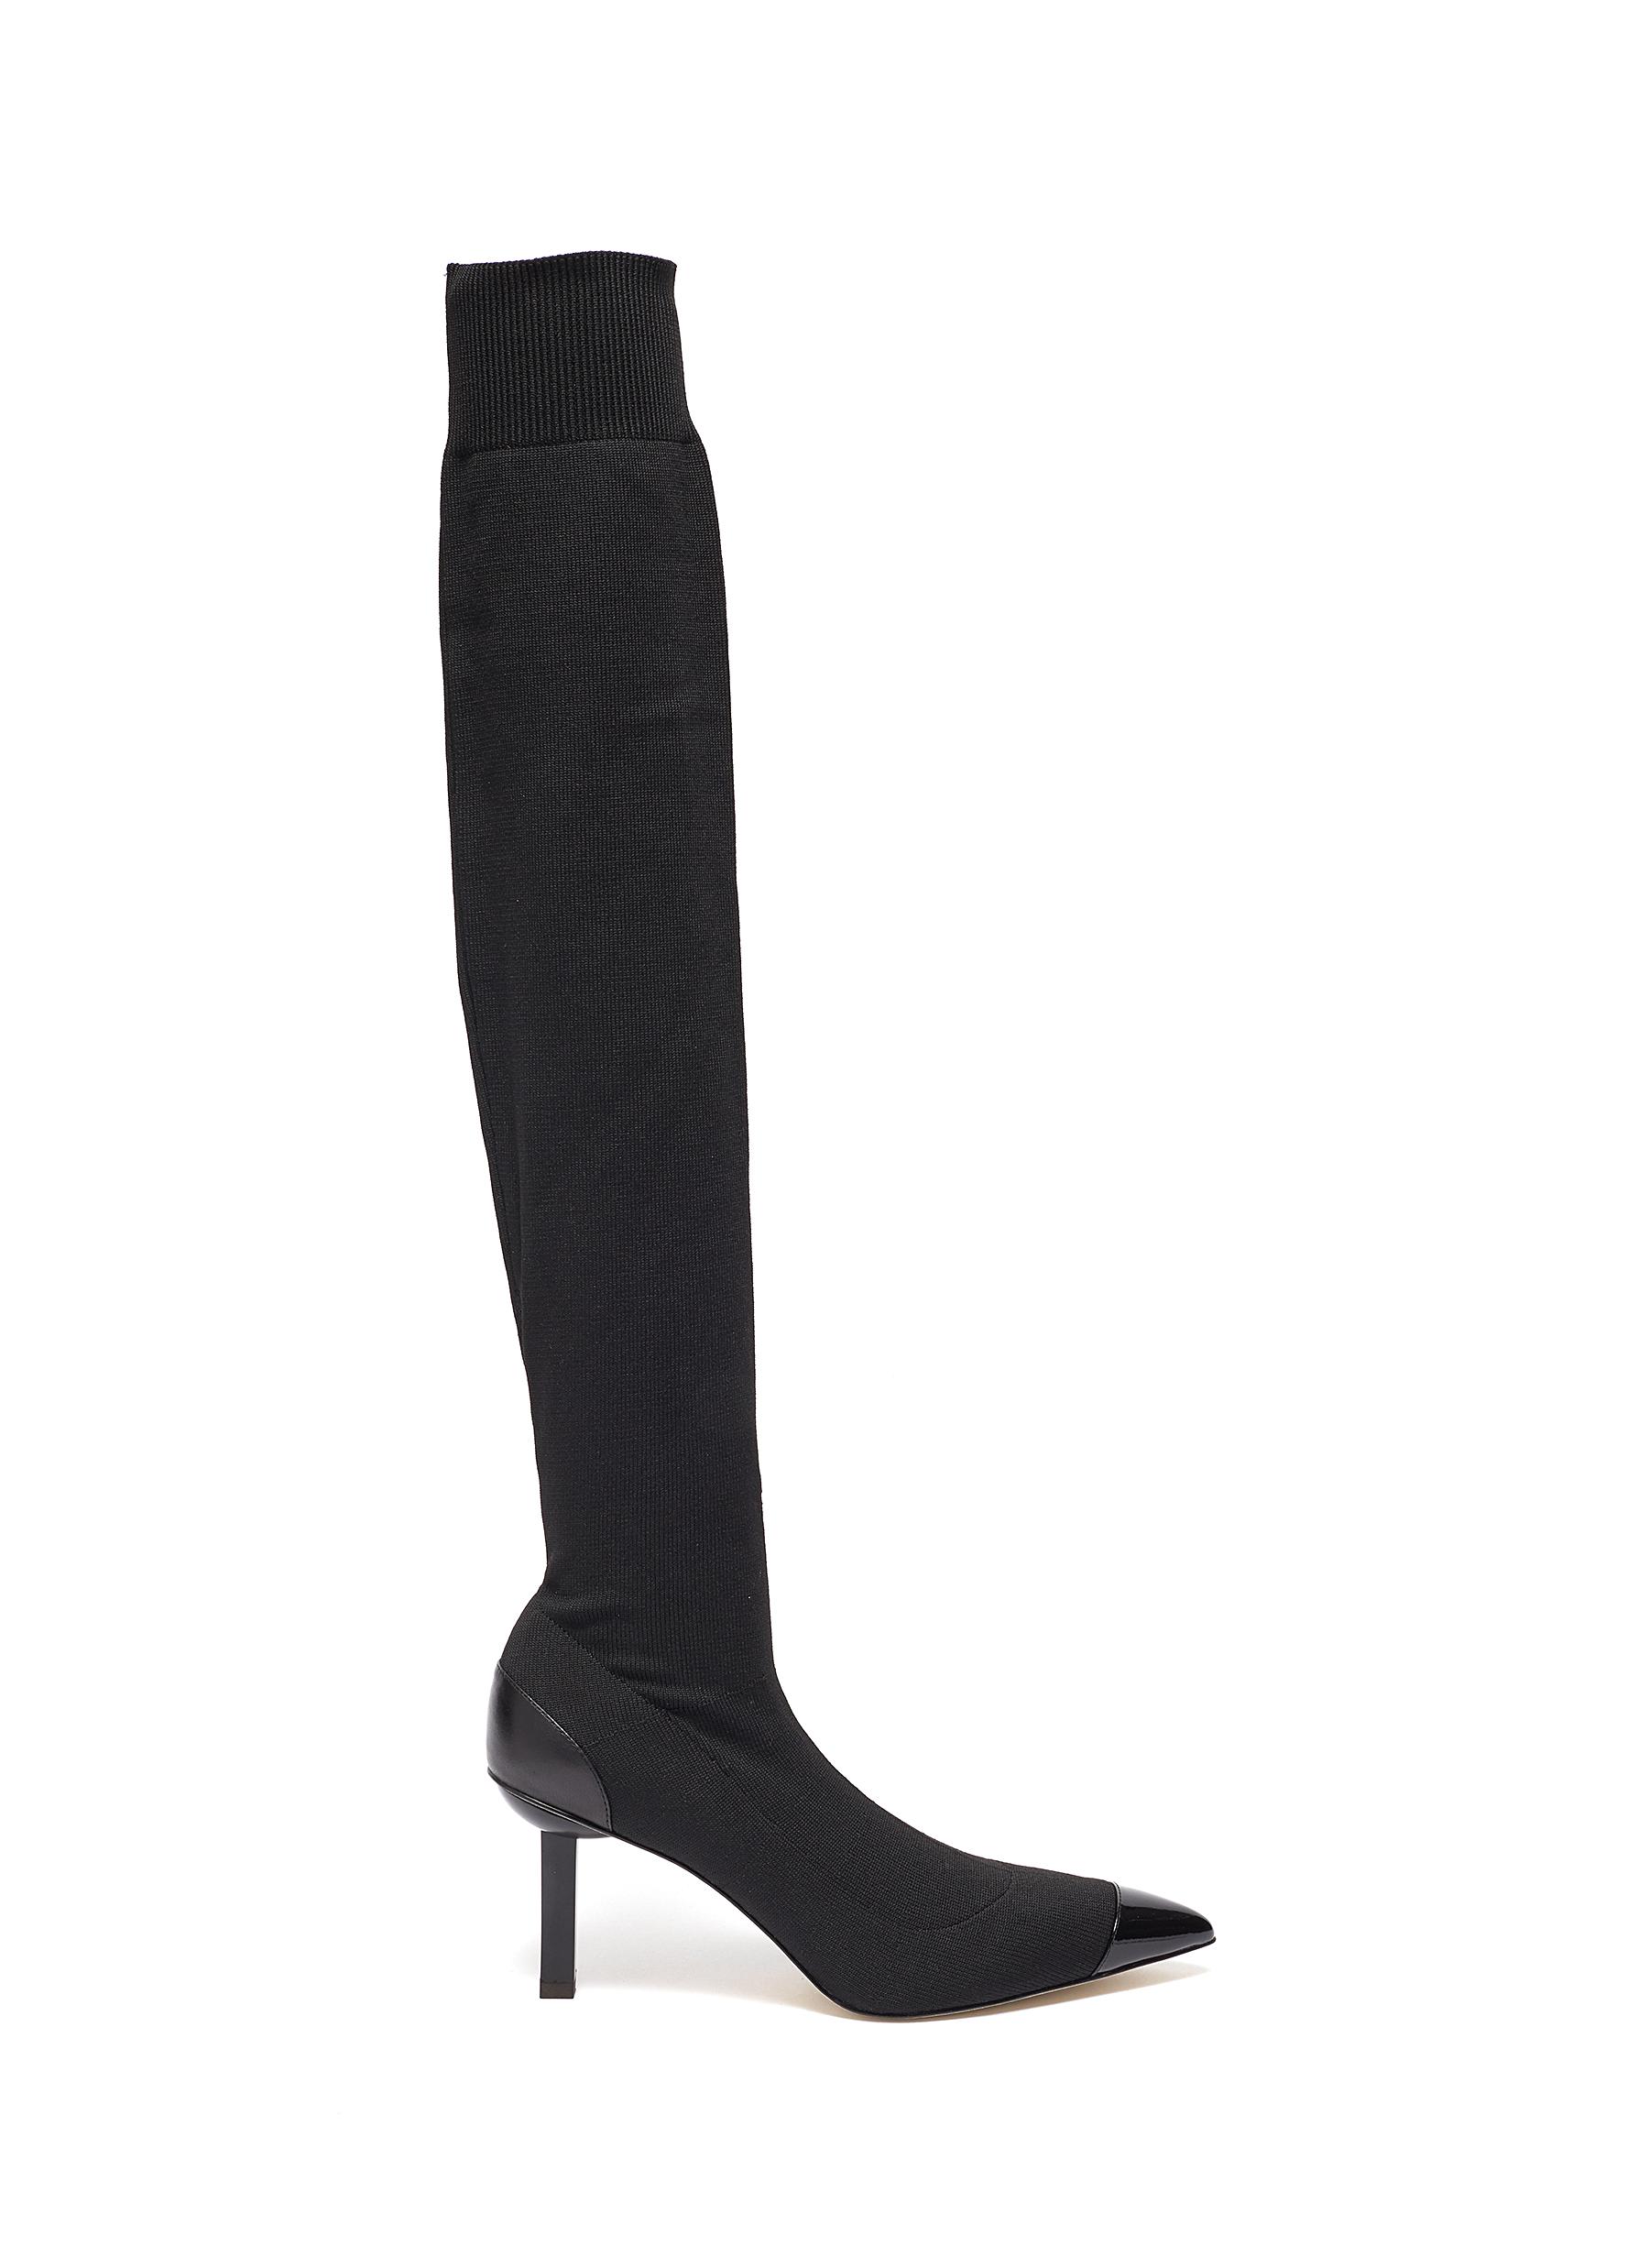 Jim pin heel leather trim sock knit over-the-knee boots by Pedder Red ...